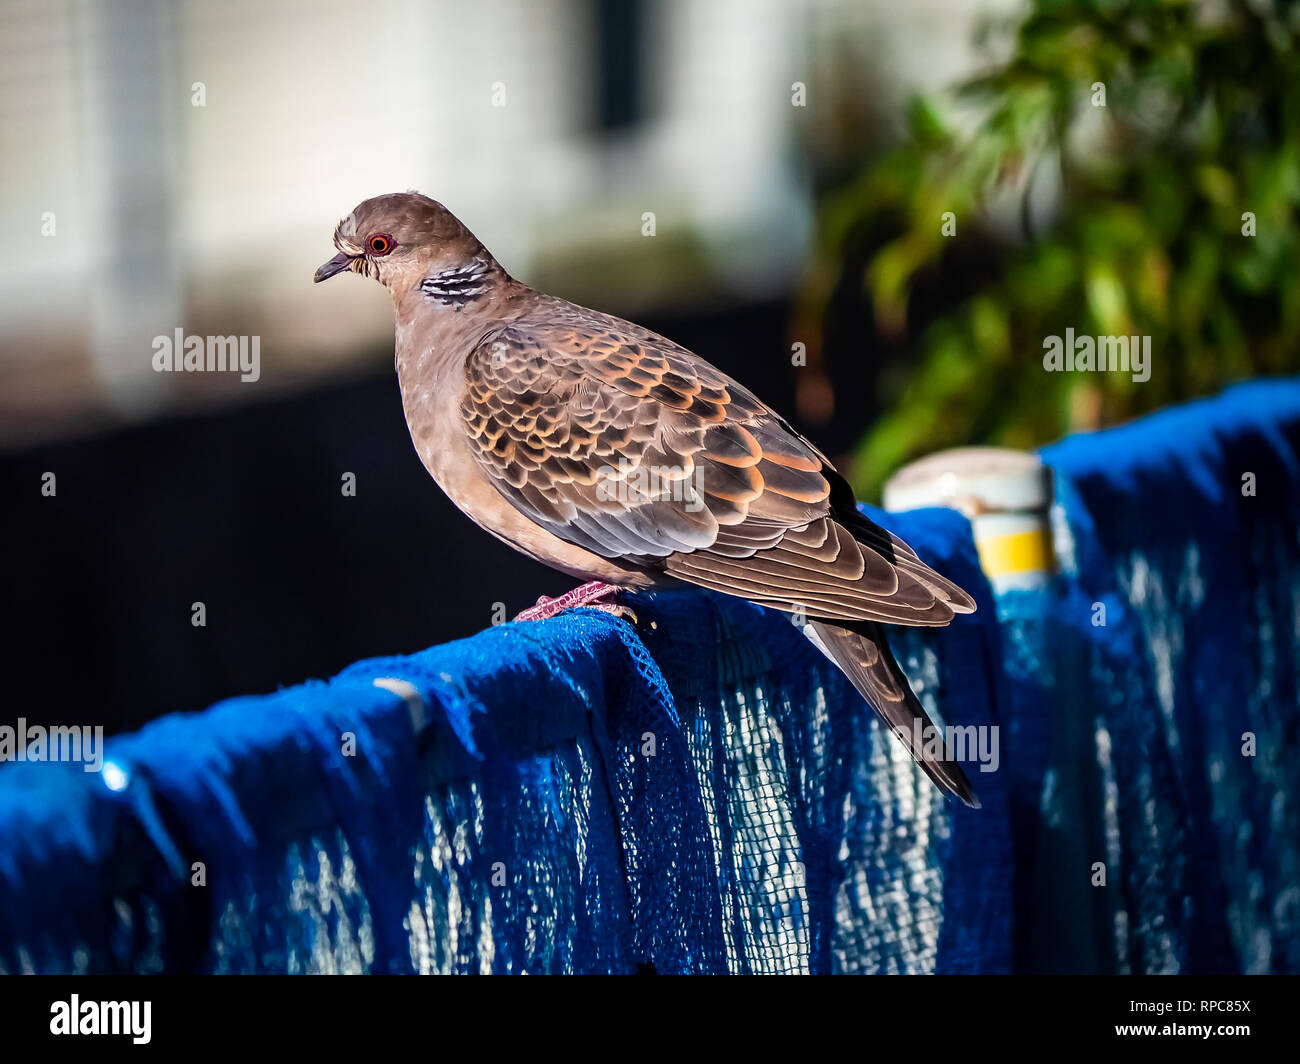 A Japanese turtledove rests on a fence in central Kanagawa Prefecture, Japan Stock Photo